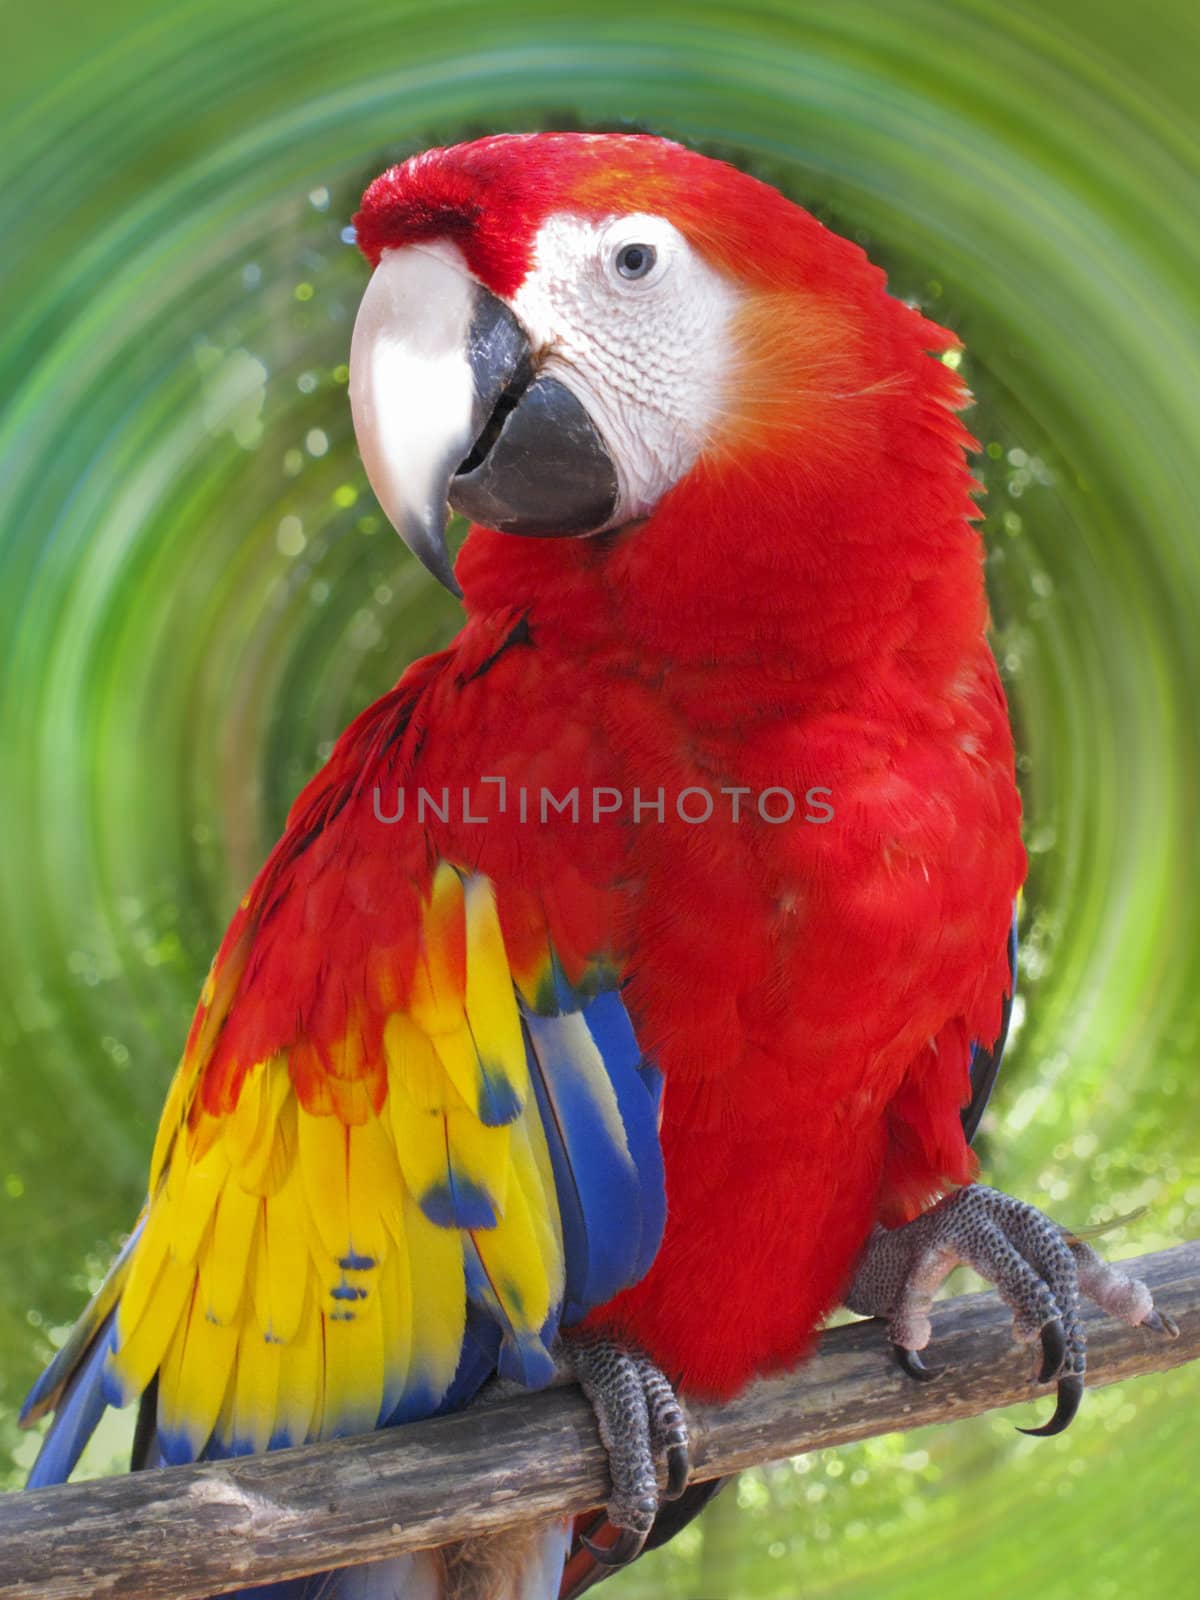 Parrot macaw by f/2sumicron